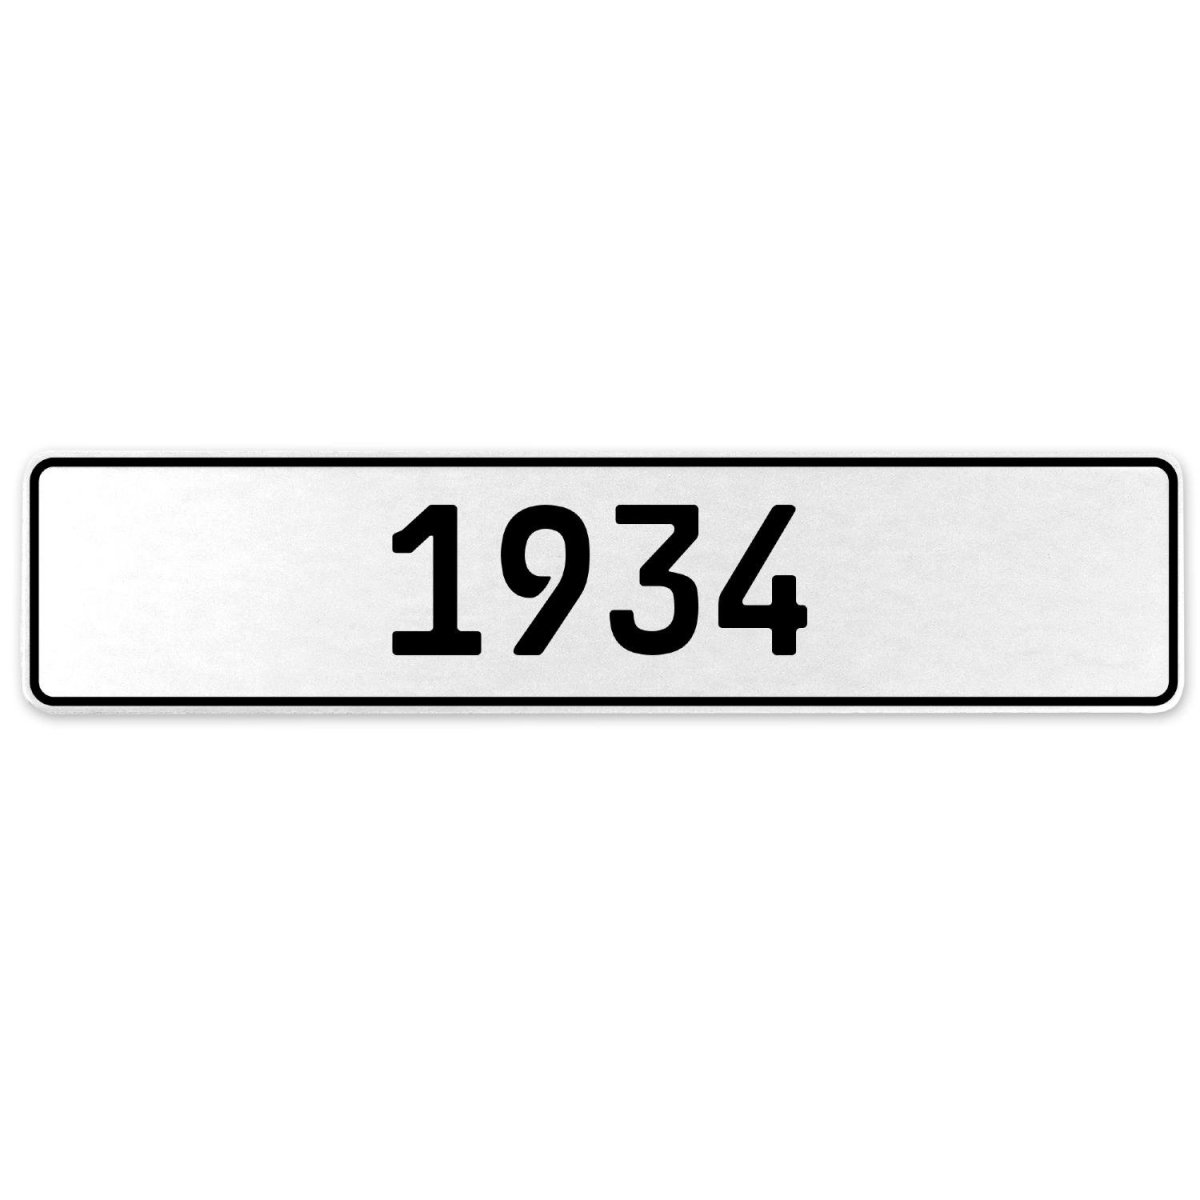 553177 1934 Year - White Aluminum Street Sign Mancave Euro Plate Name Door Sign Wall